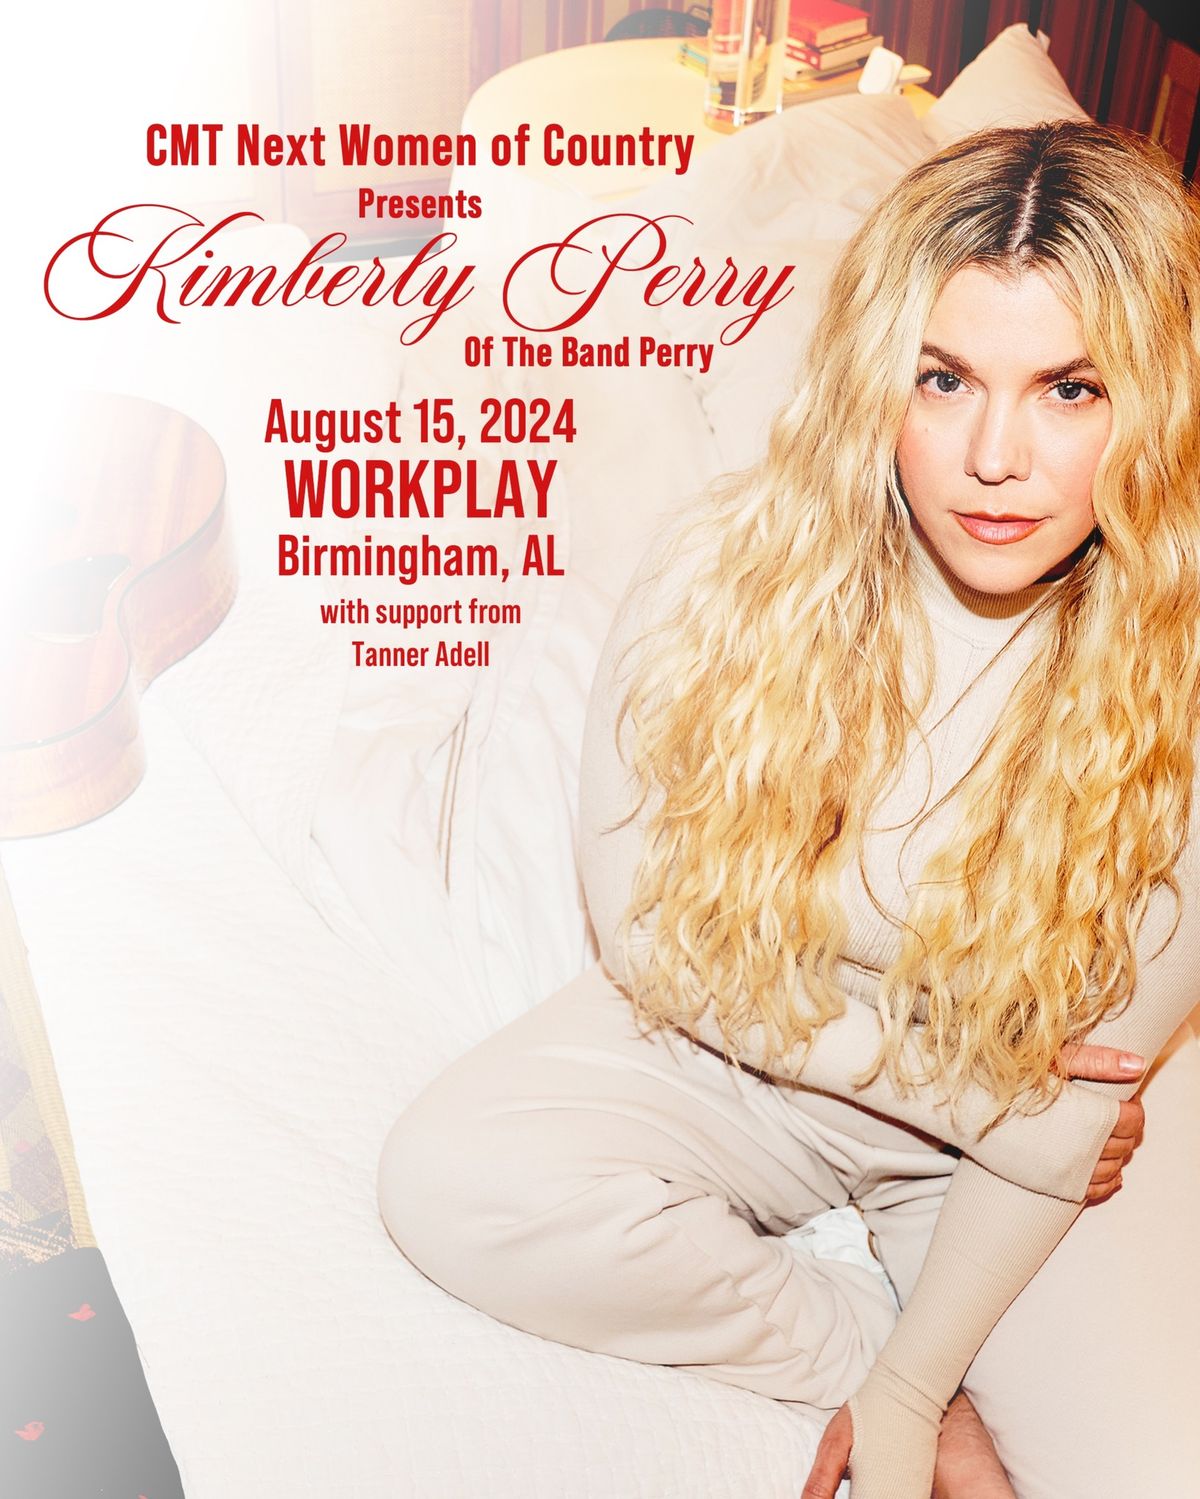 Kimberly Perry (of The Band Perry) - Birmingham, AL